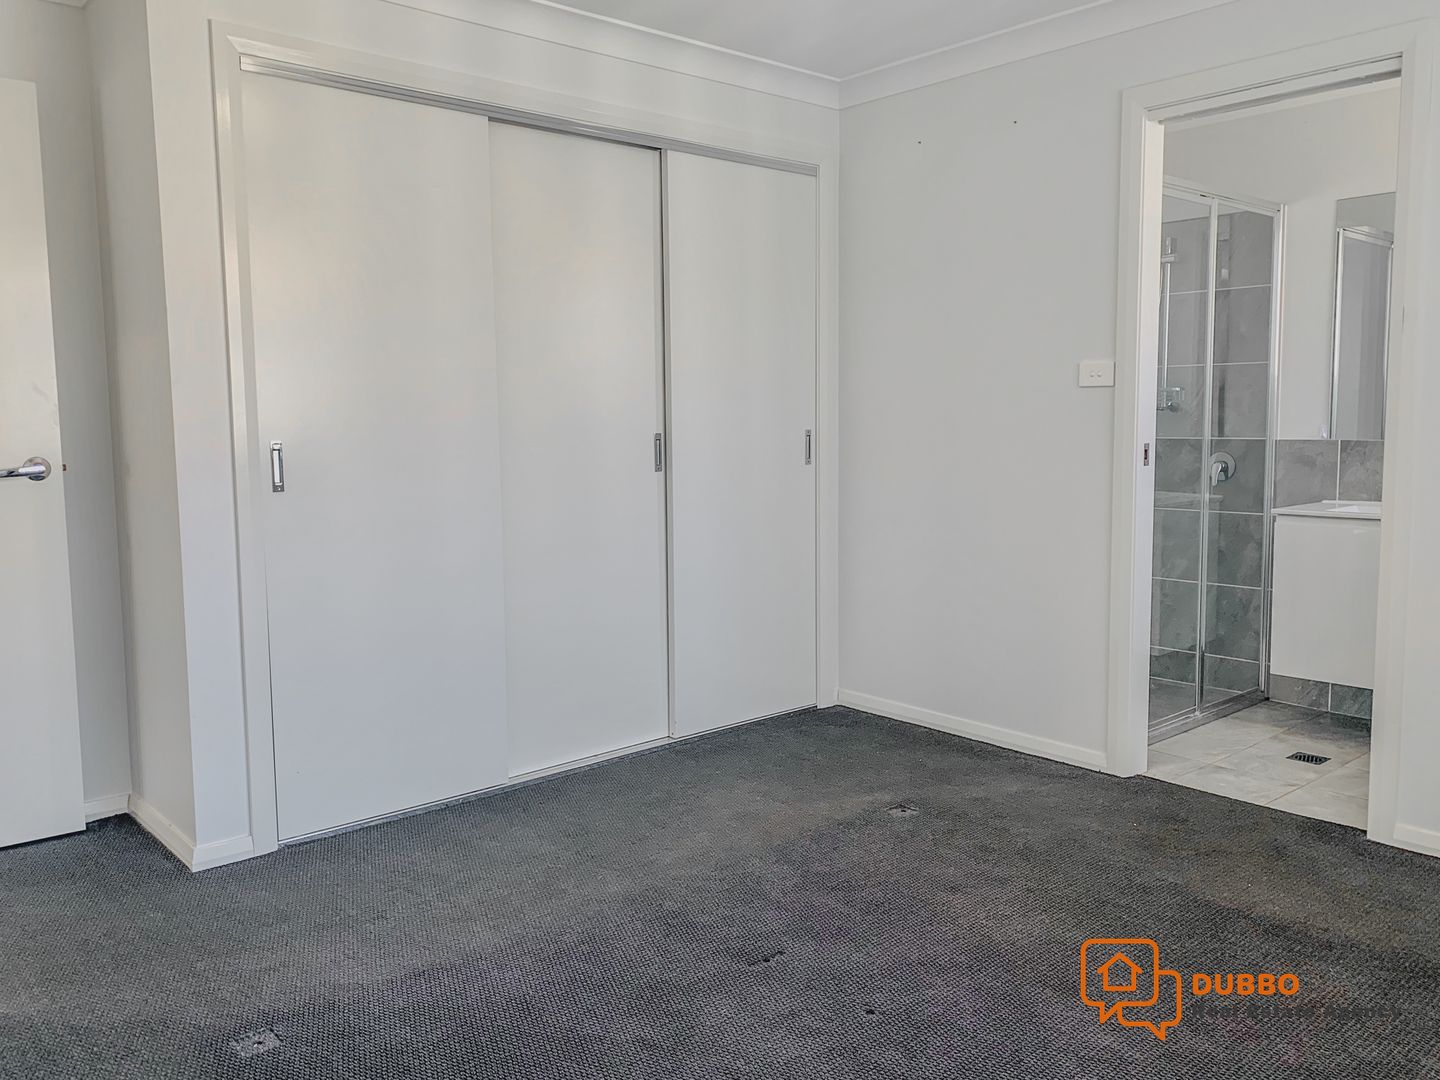 7A Apsley Crescent, Dubbo NSW 2830, Image 2